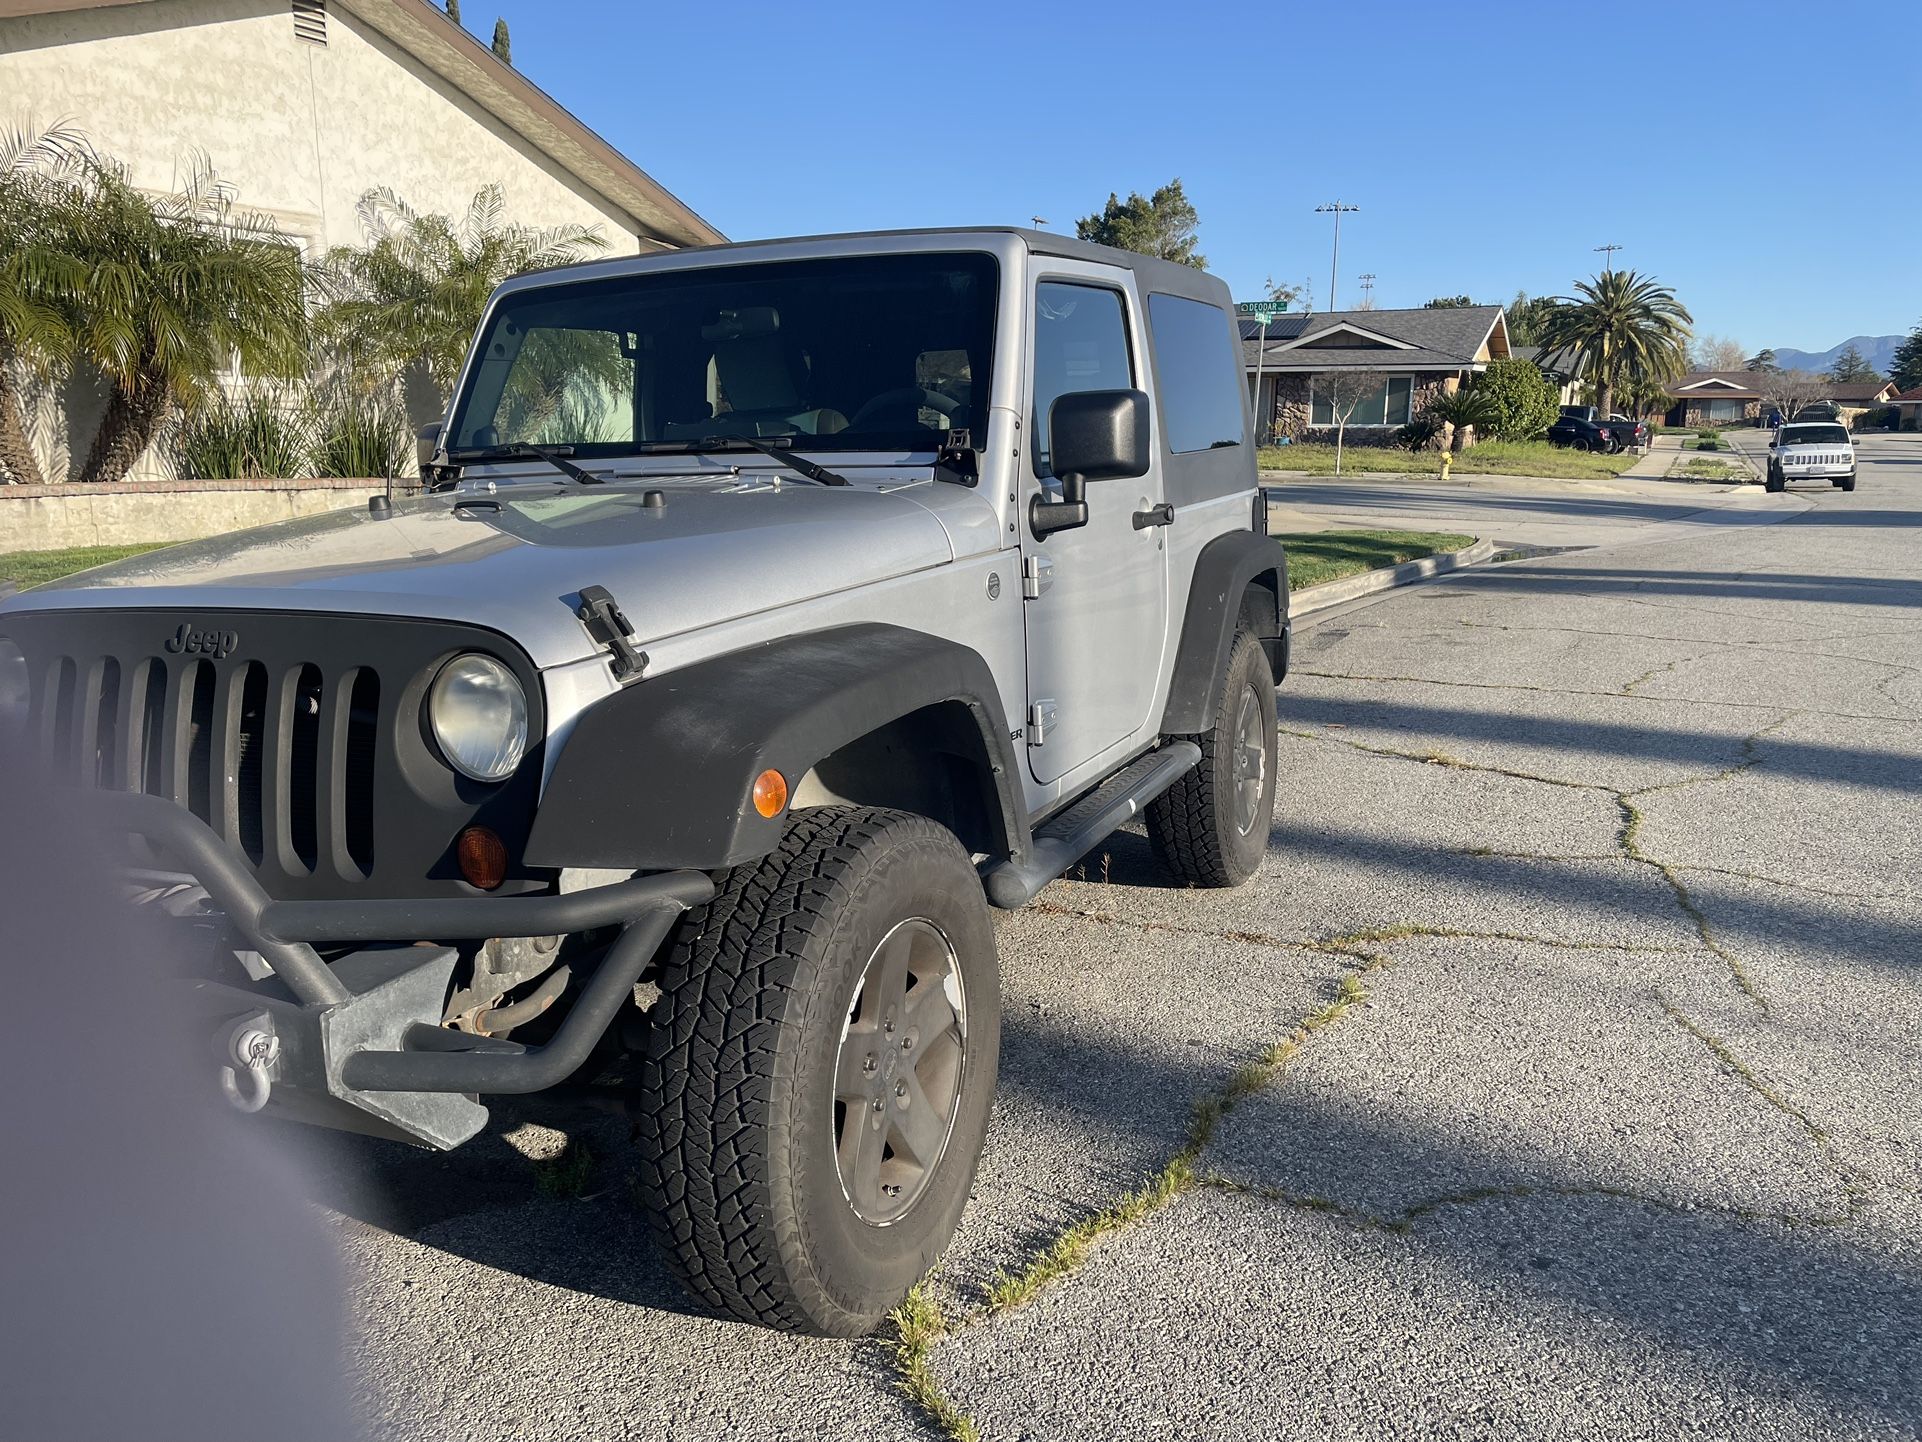 2008 Jeep Wrangler for Sale in Fontana, CA - OfferUp